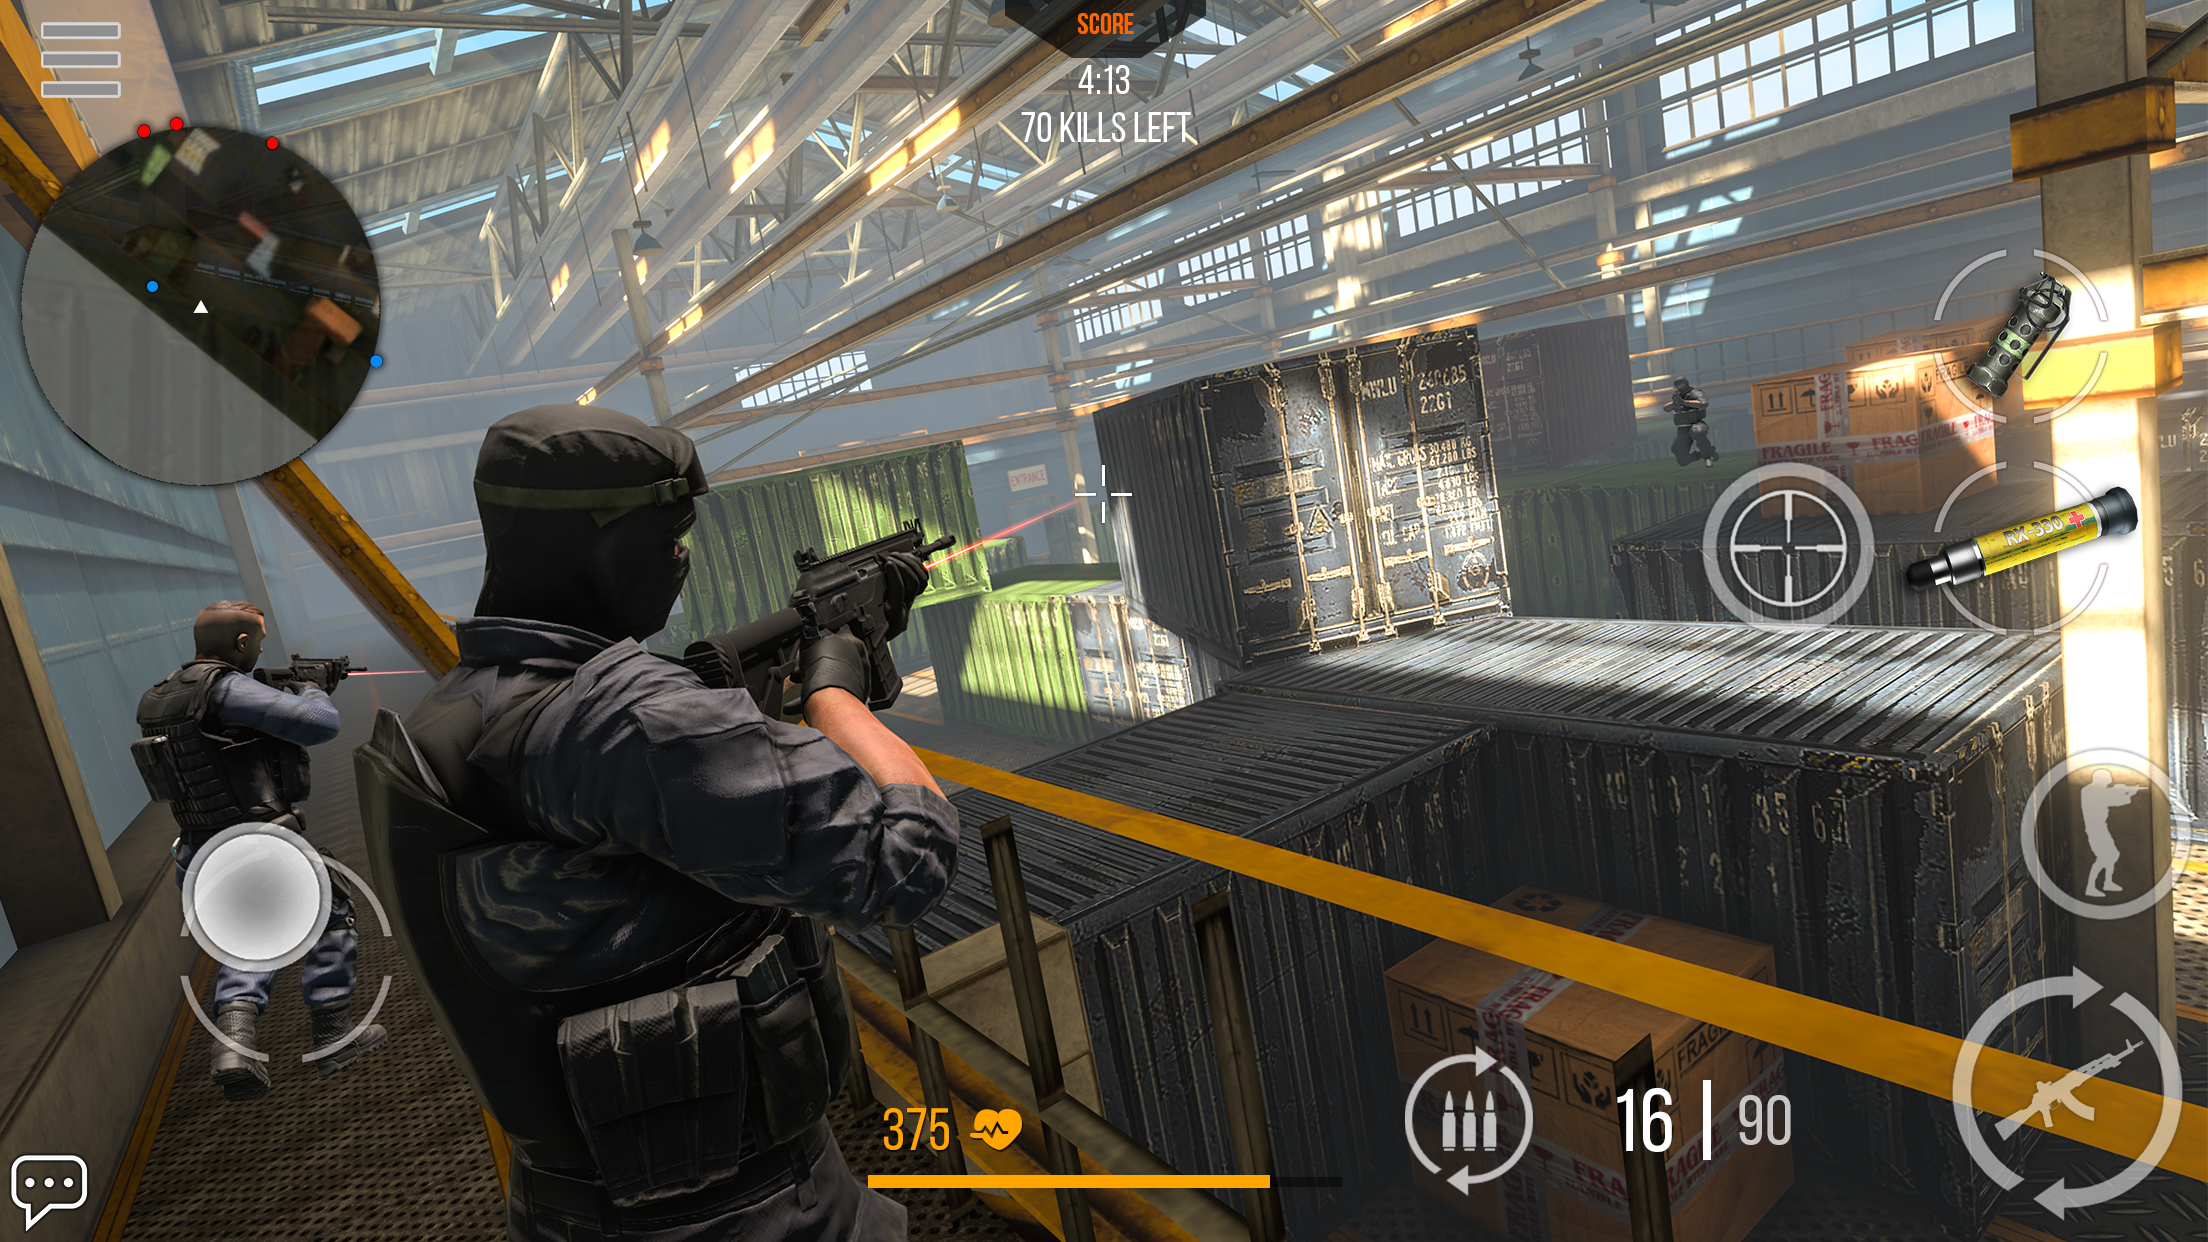 CSGO Mobile APK Download Free + Data (Full Version) 2022 For Android